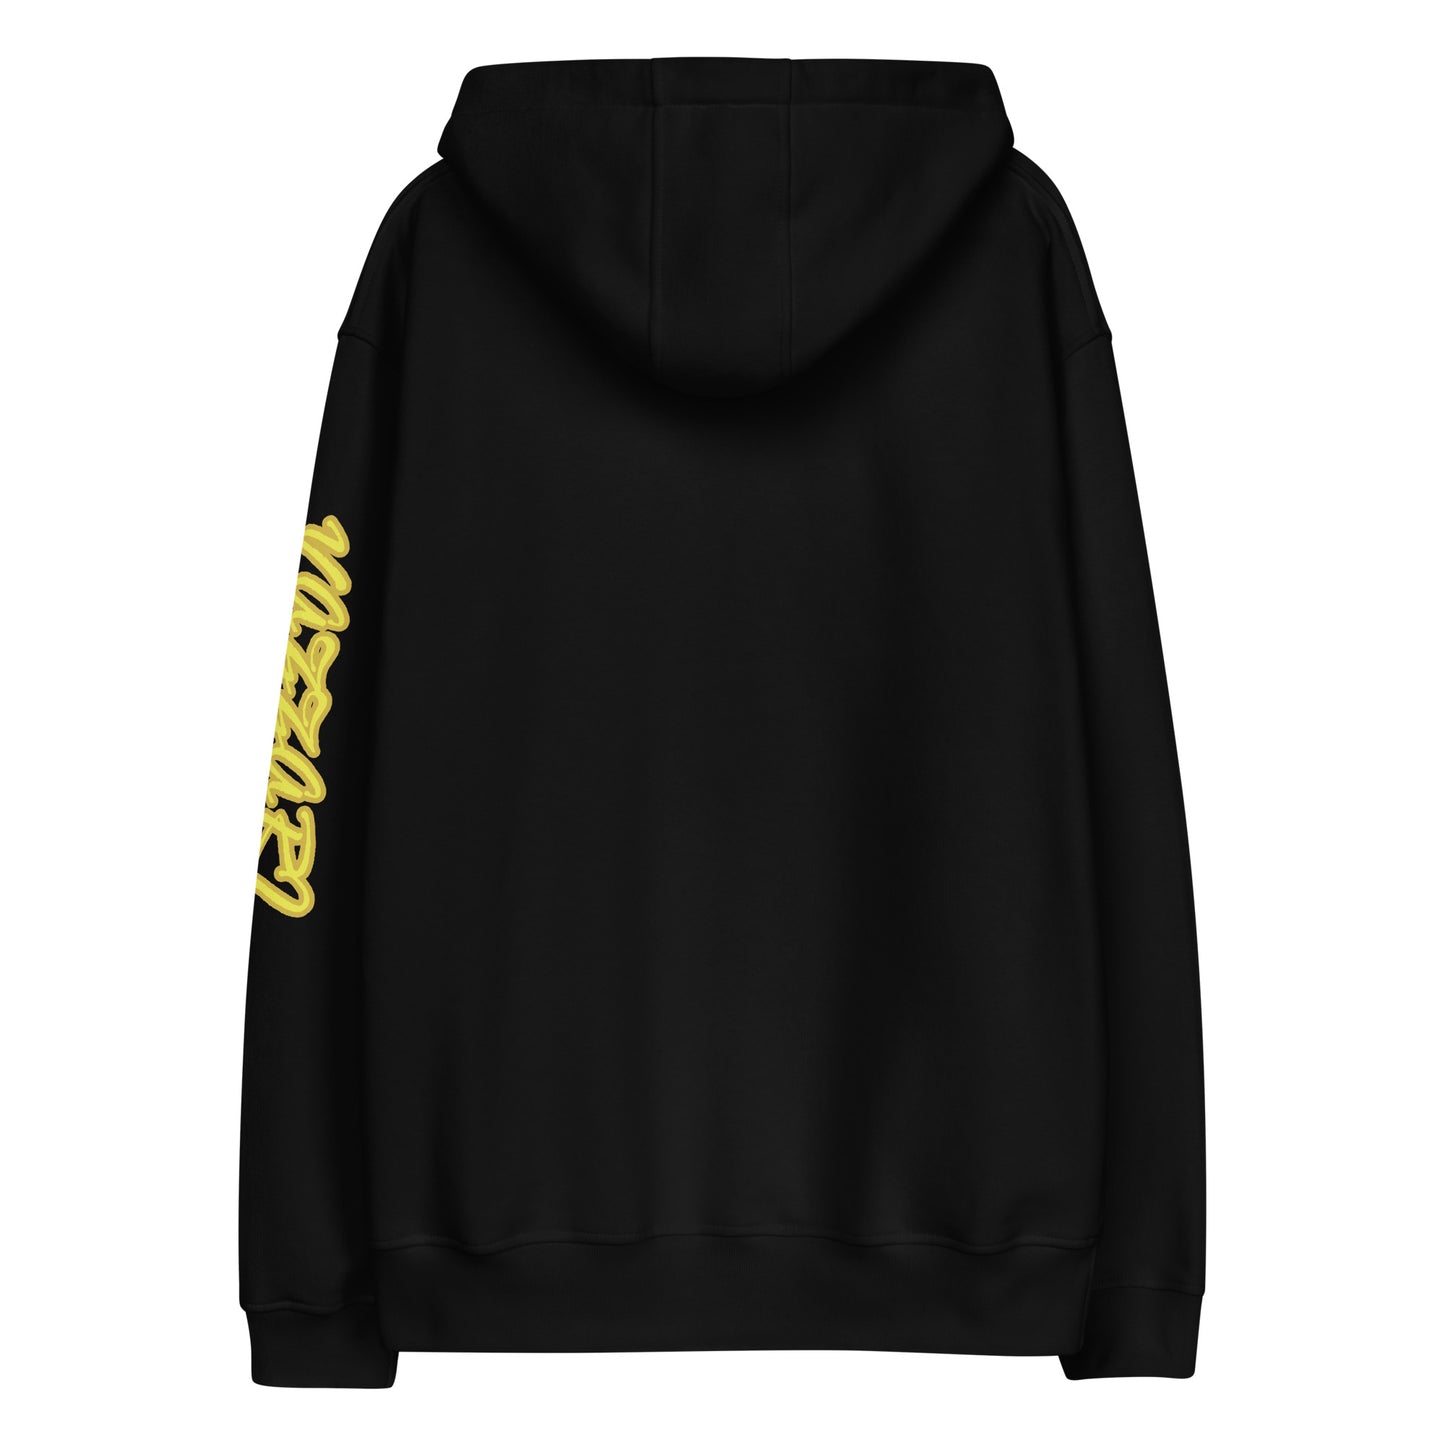 VZI C. - High Card Queen: Women's Organic Hoodie - Gold ink, card graphic, smart casual